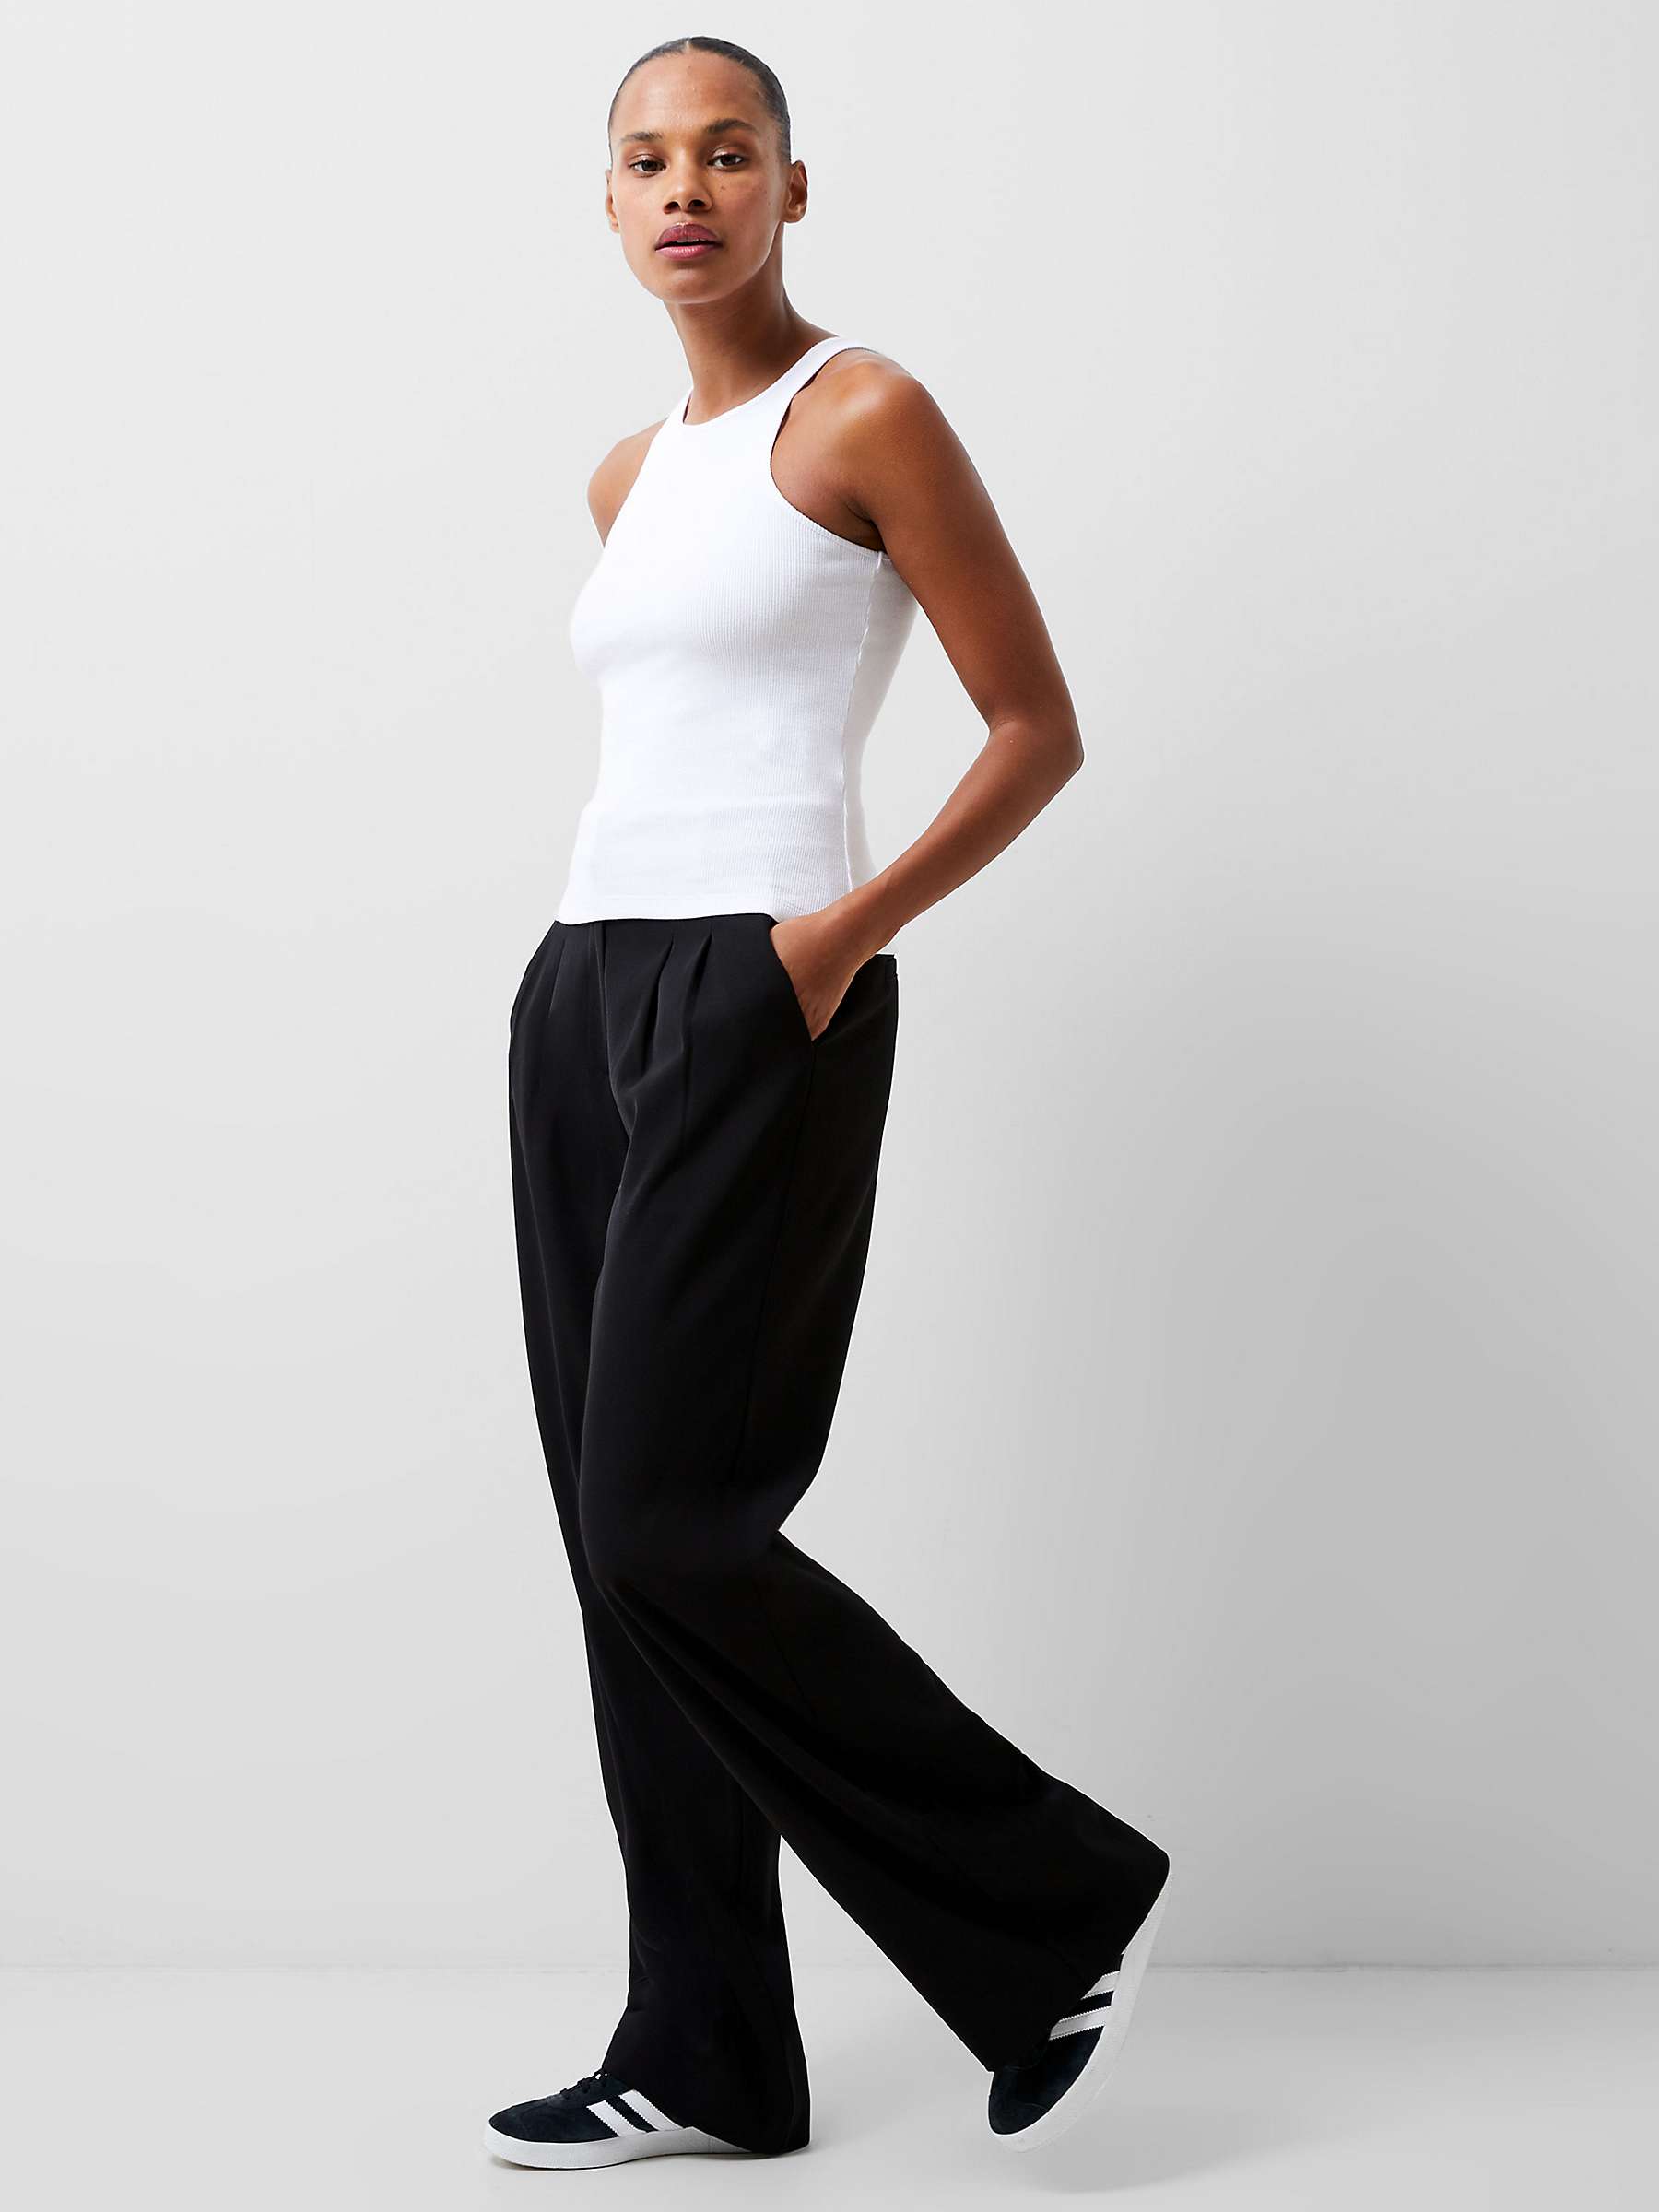 Buy French Connection Rassia Sheryle Cotton Stretch Vest Online at johnlewis.com